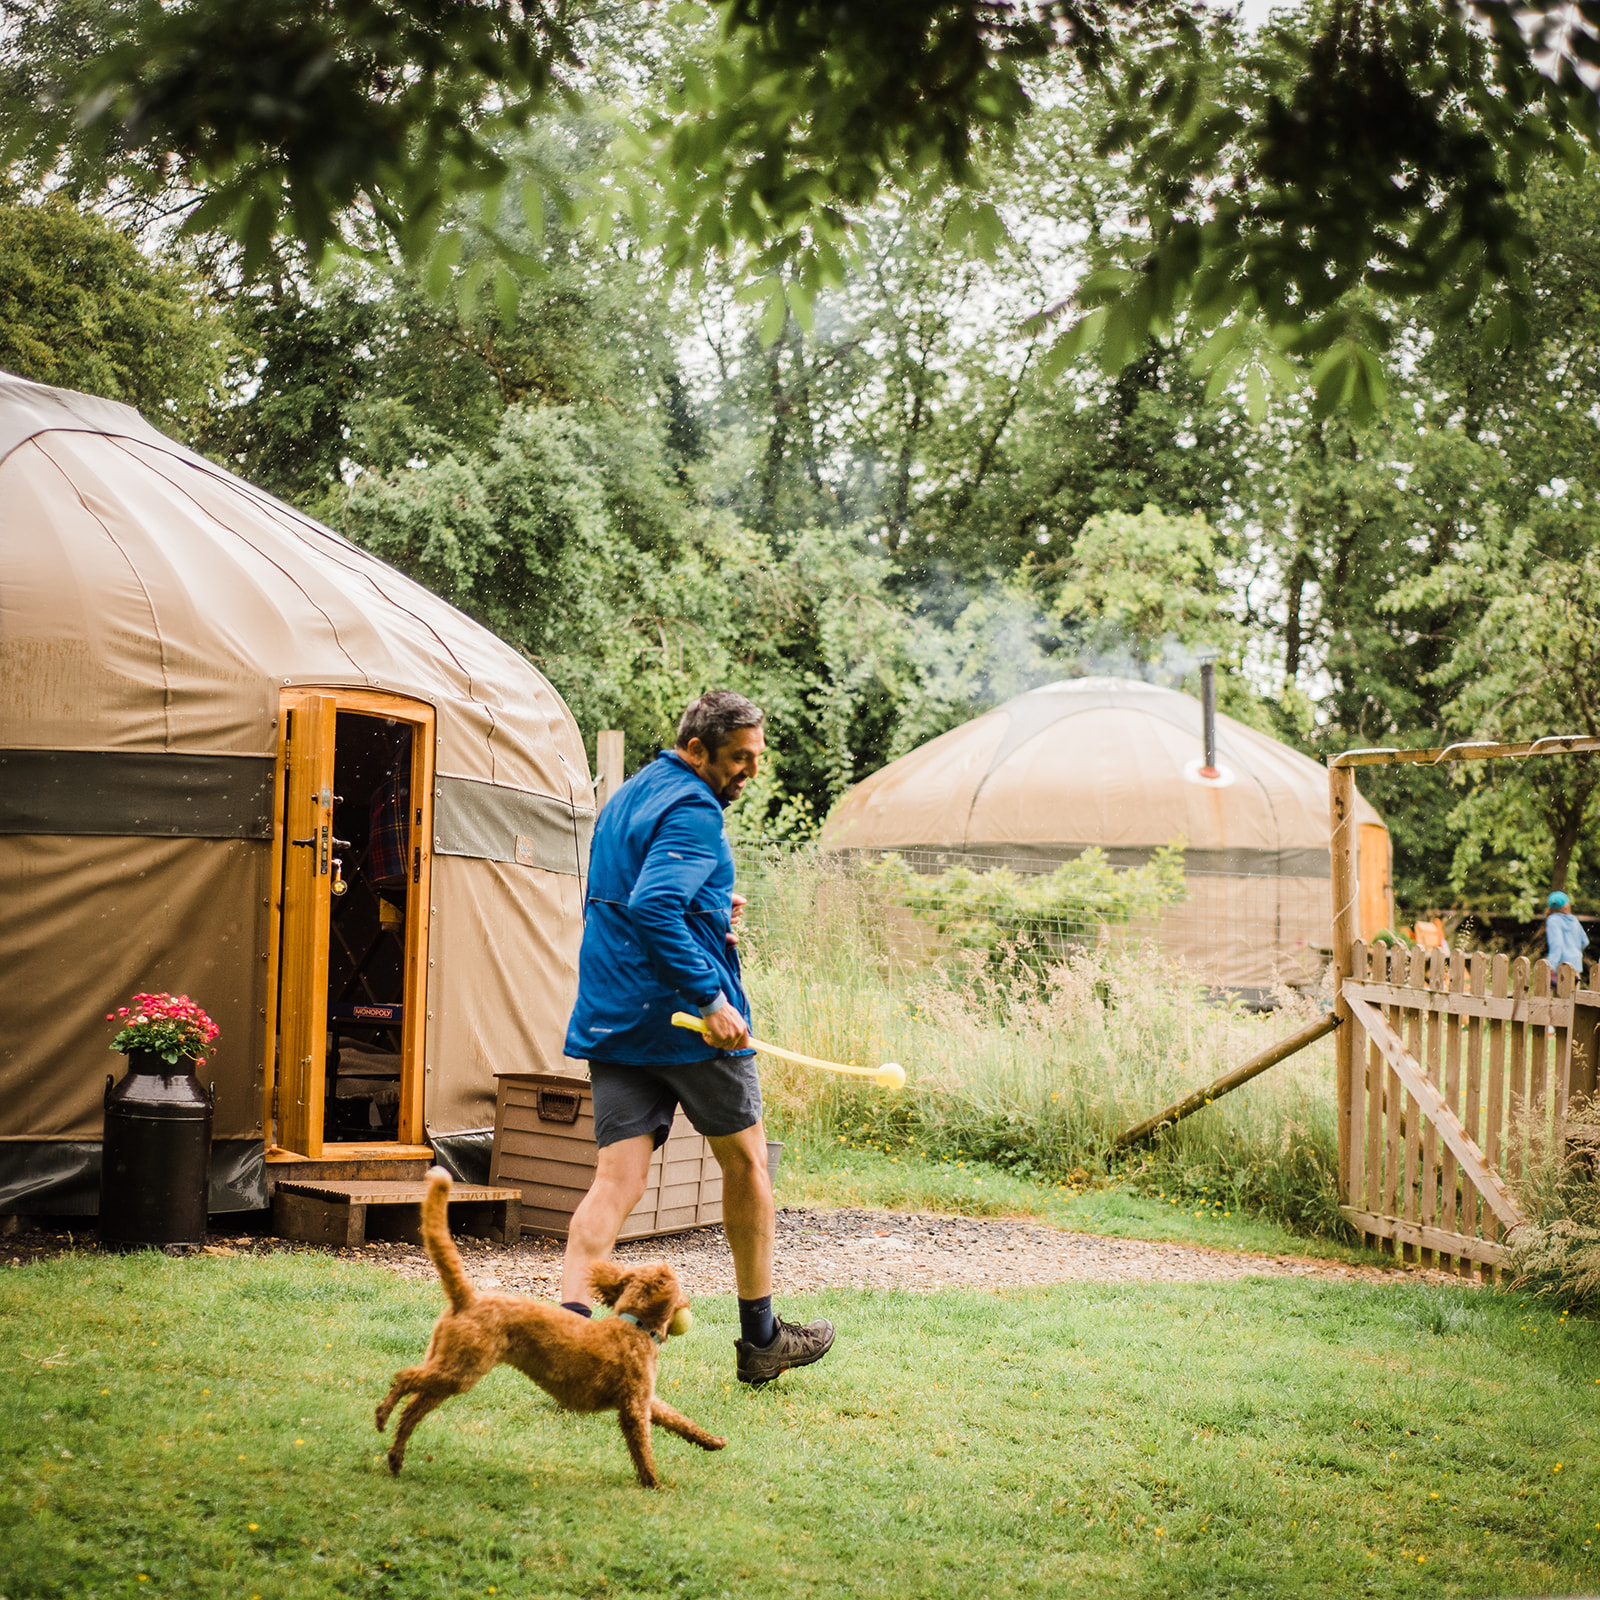 Dog friendly Cotswold holiday. Man and dog at a dog friendly yurt glamping site